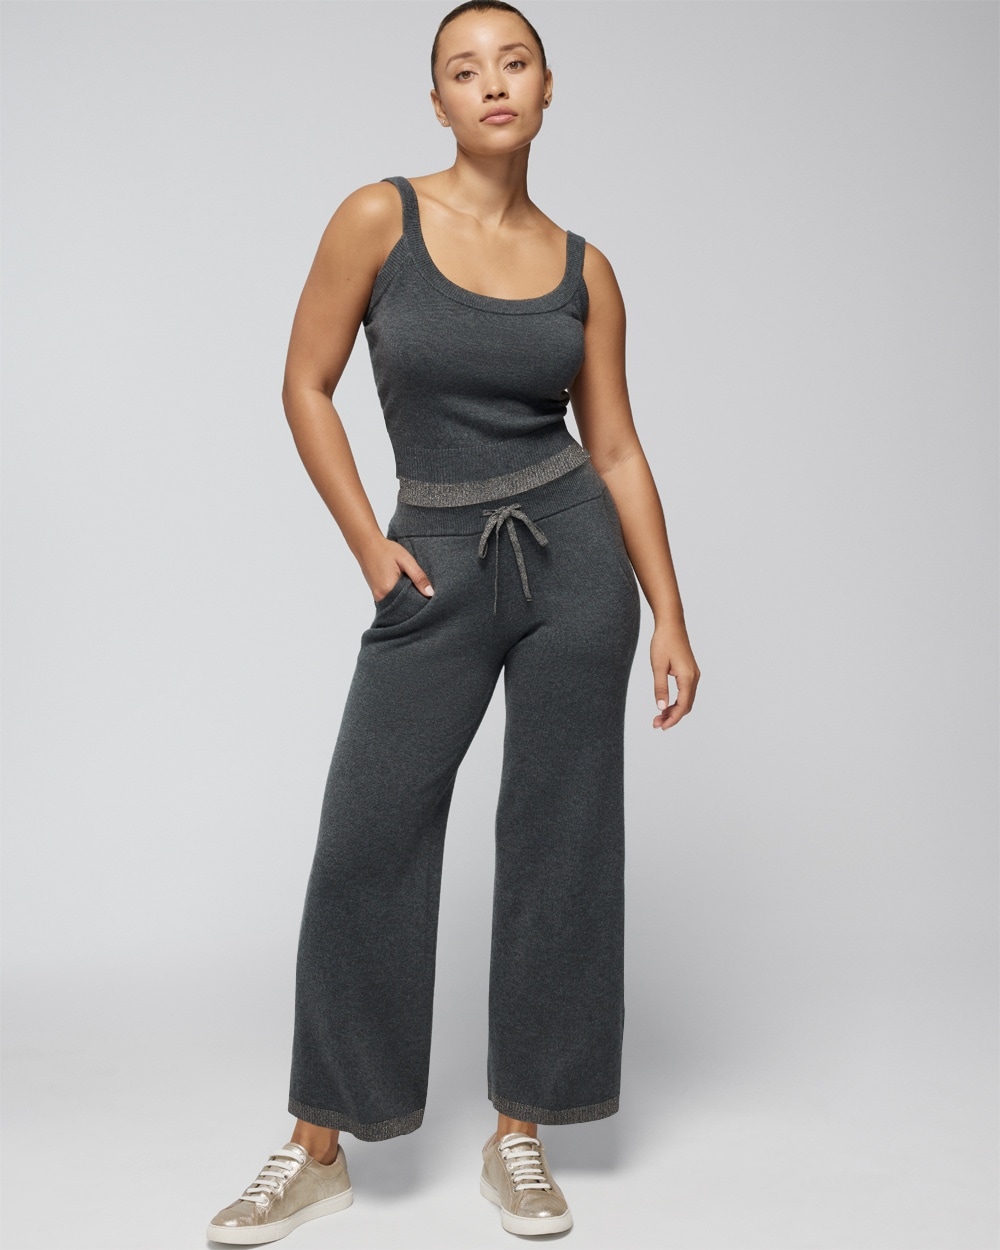 Luxe Soft Wide-Leg Pants video preview image, click to start video